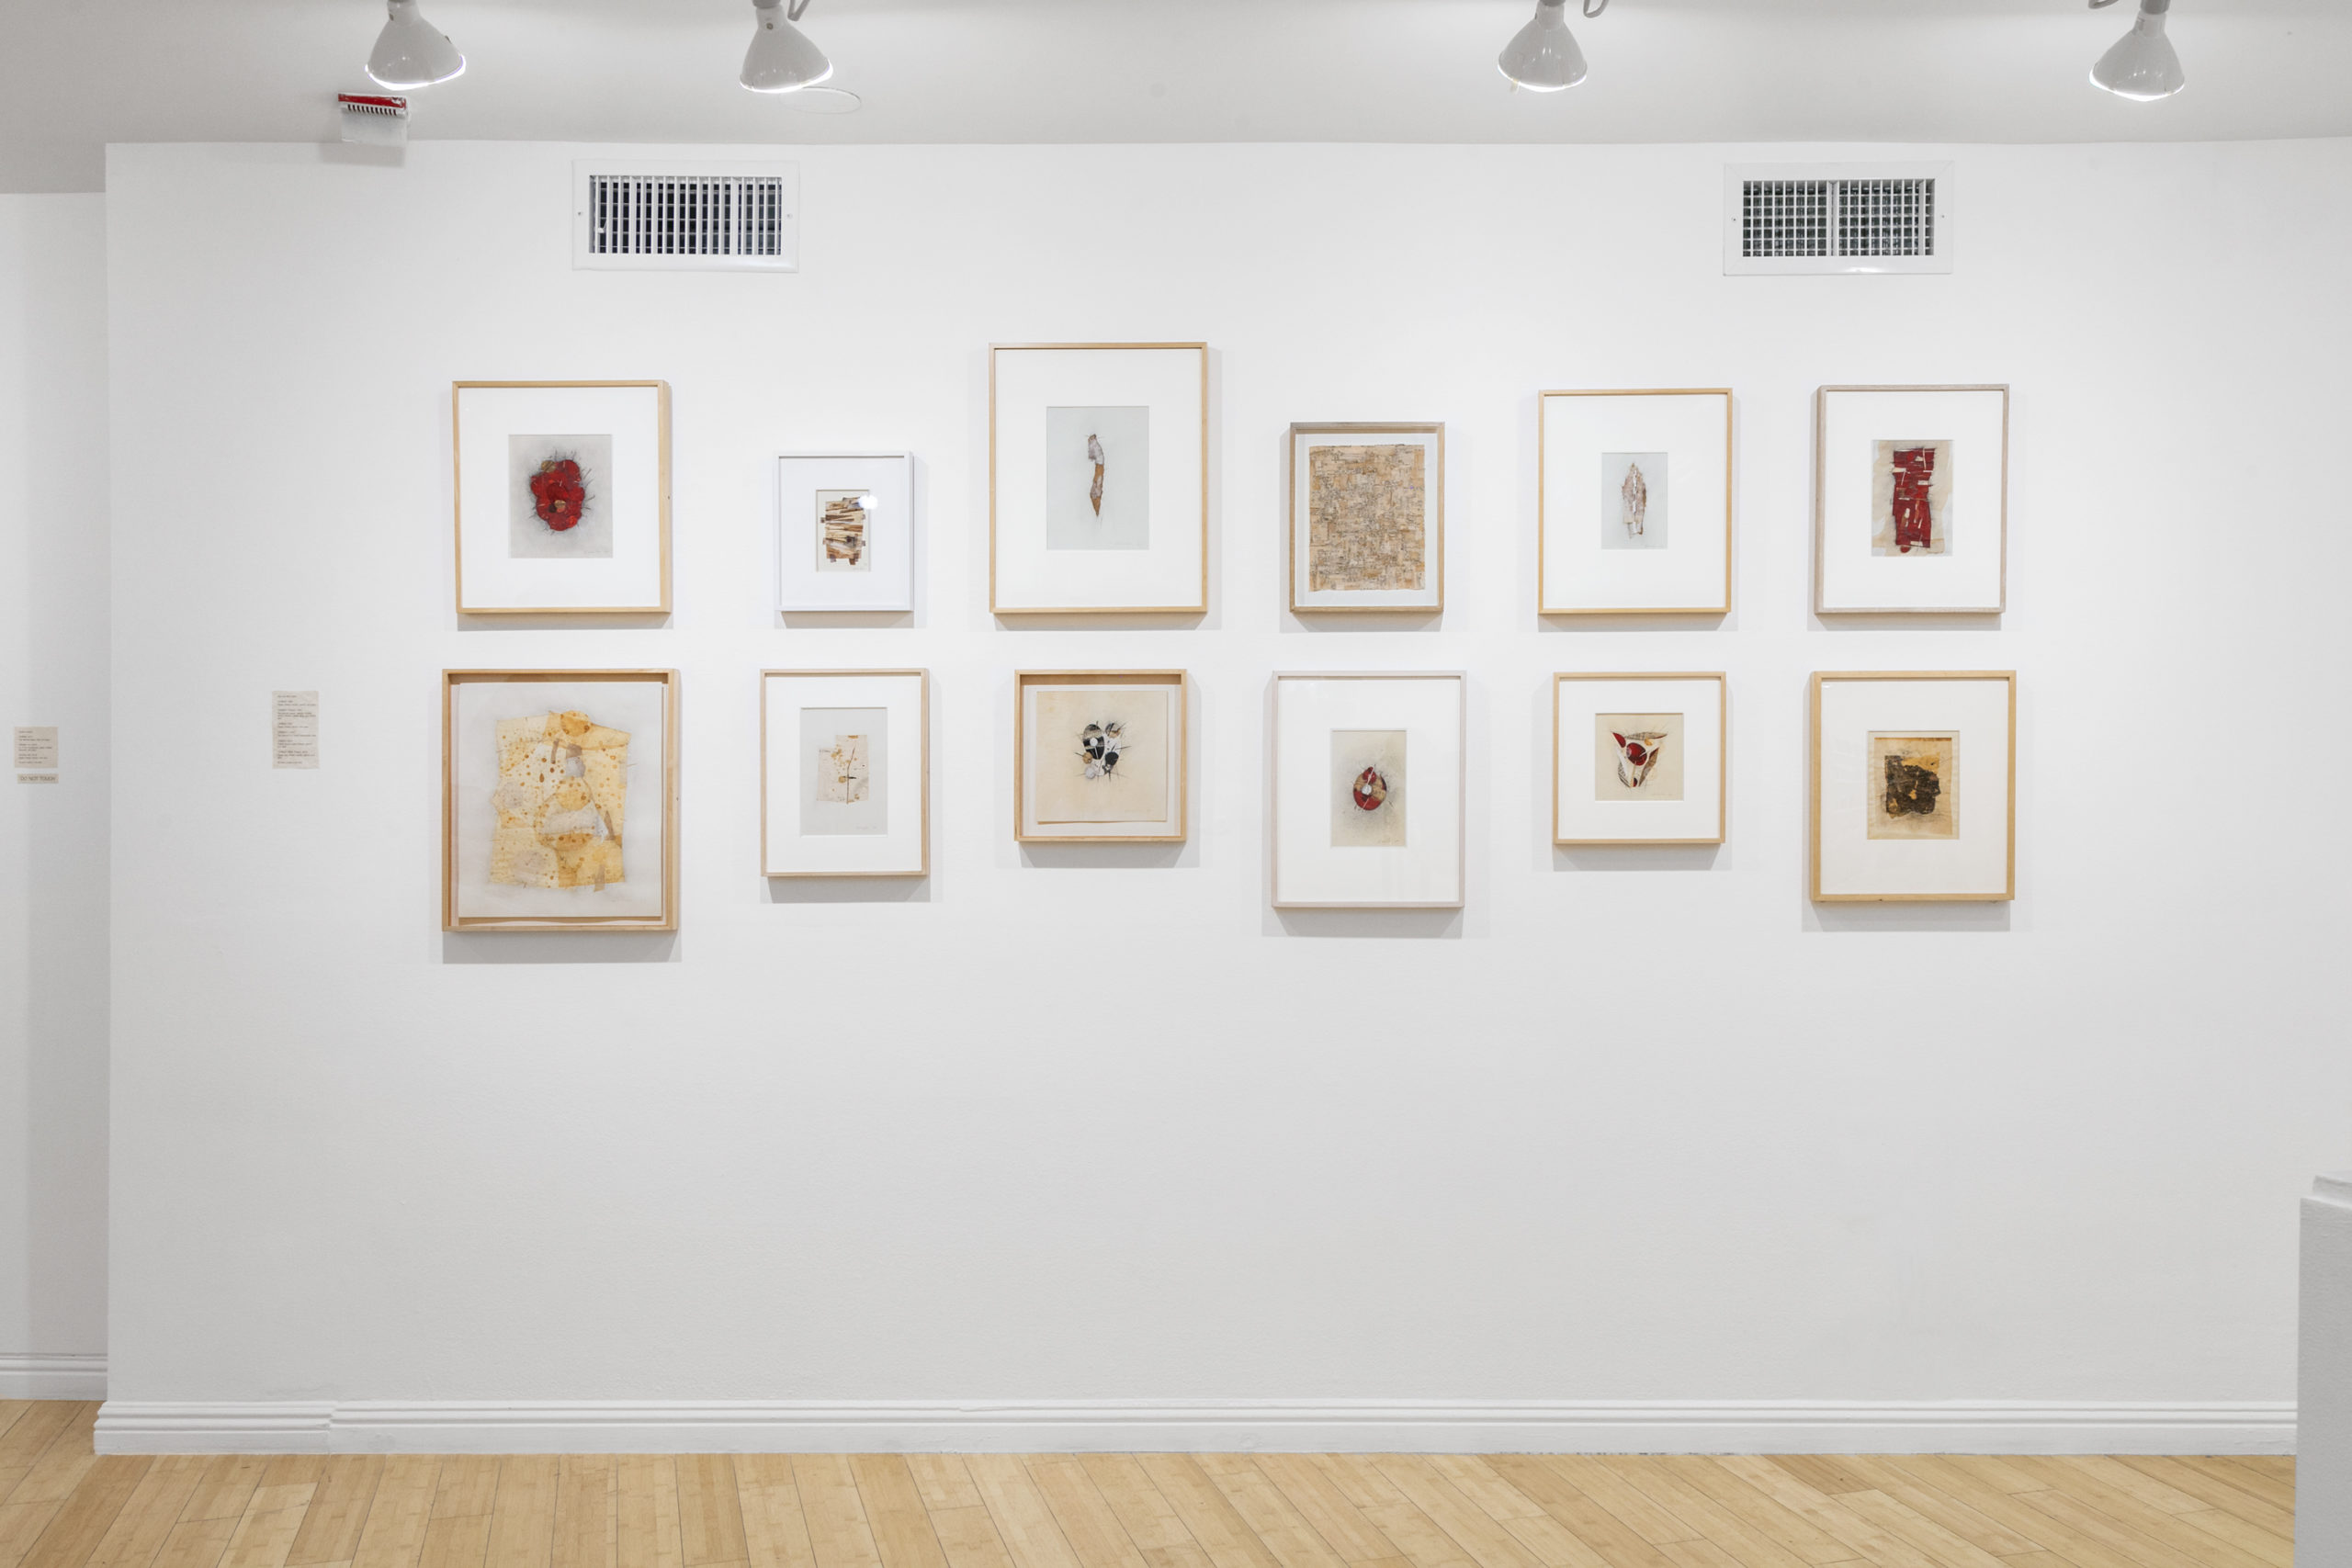 Finding The Center: Works by Echiko Ohira, installation view, 2019.